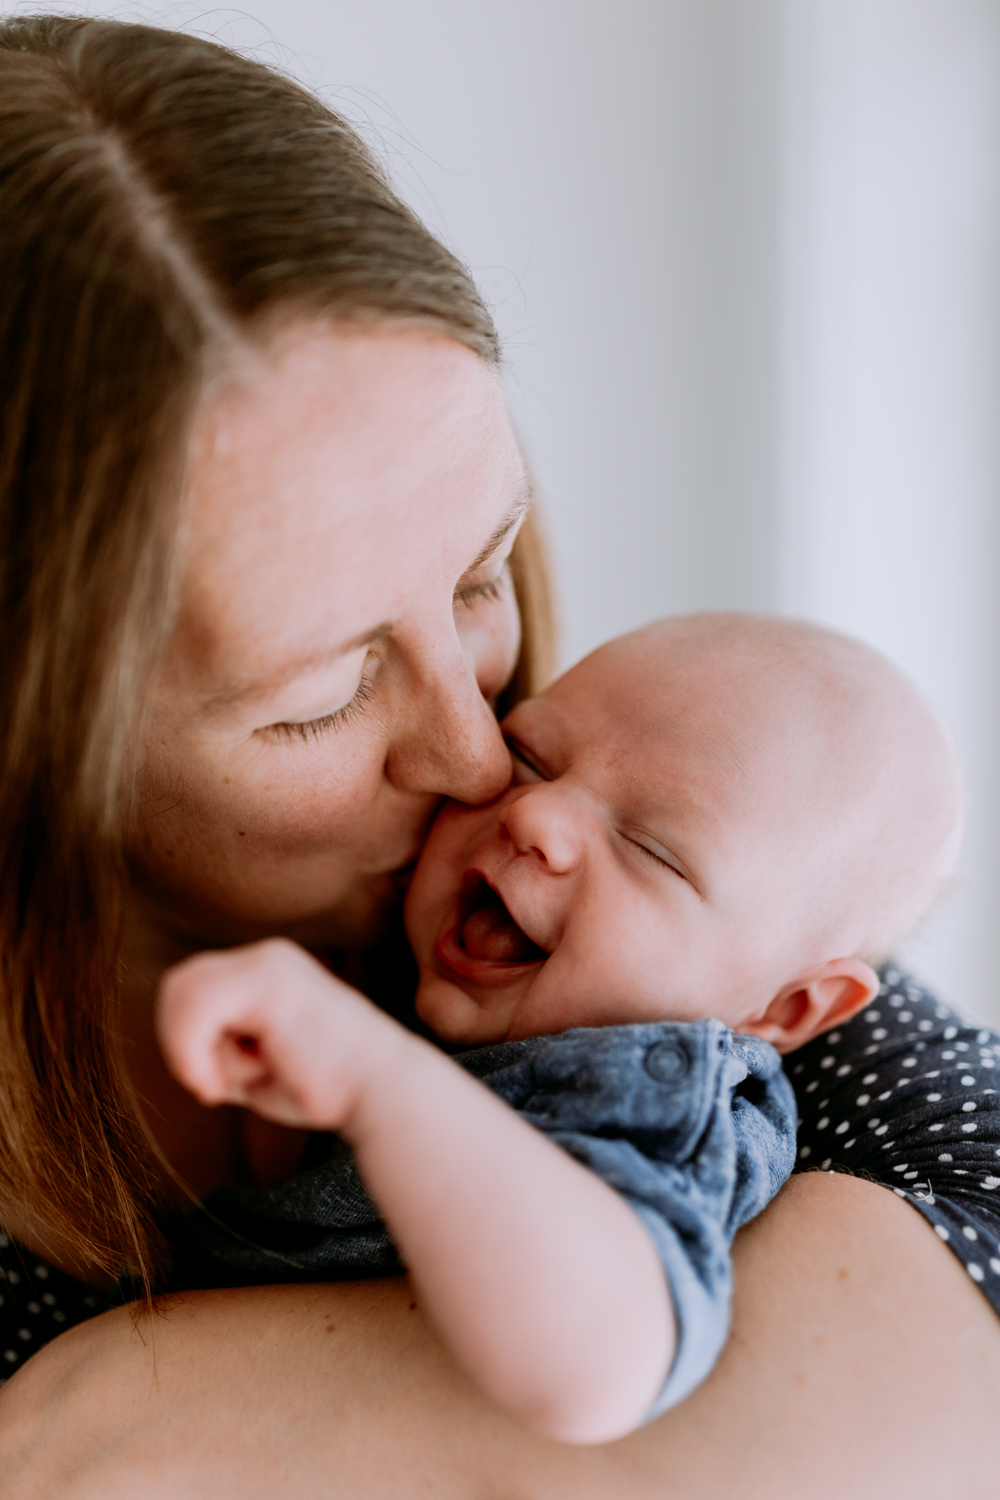 In home lifestyle newborn photo session | Mum and newborn | Natural family lifestyle photography in Hampshire | Ewa Jones Photography